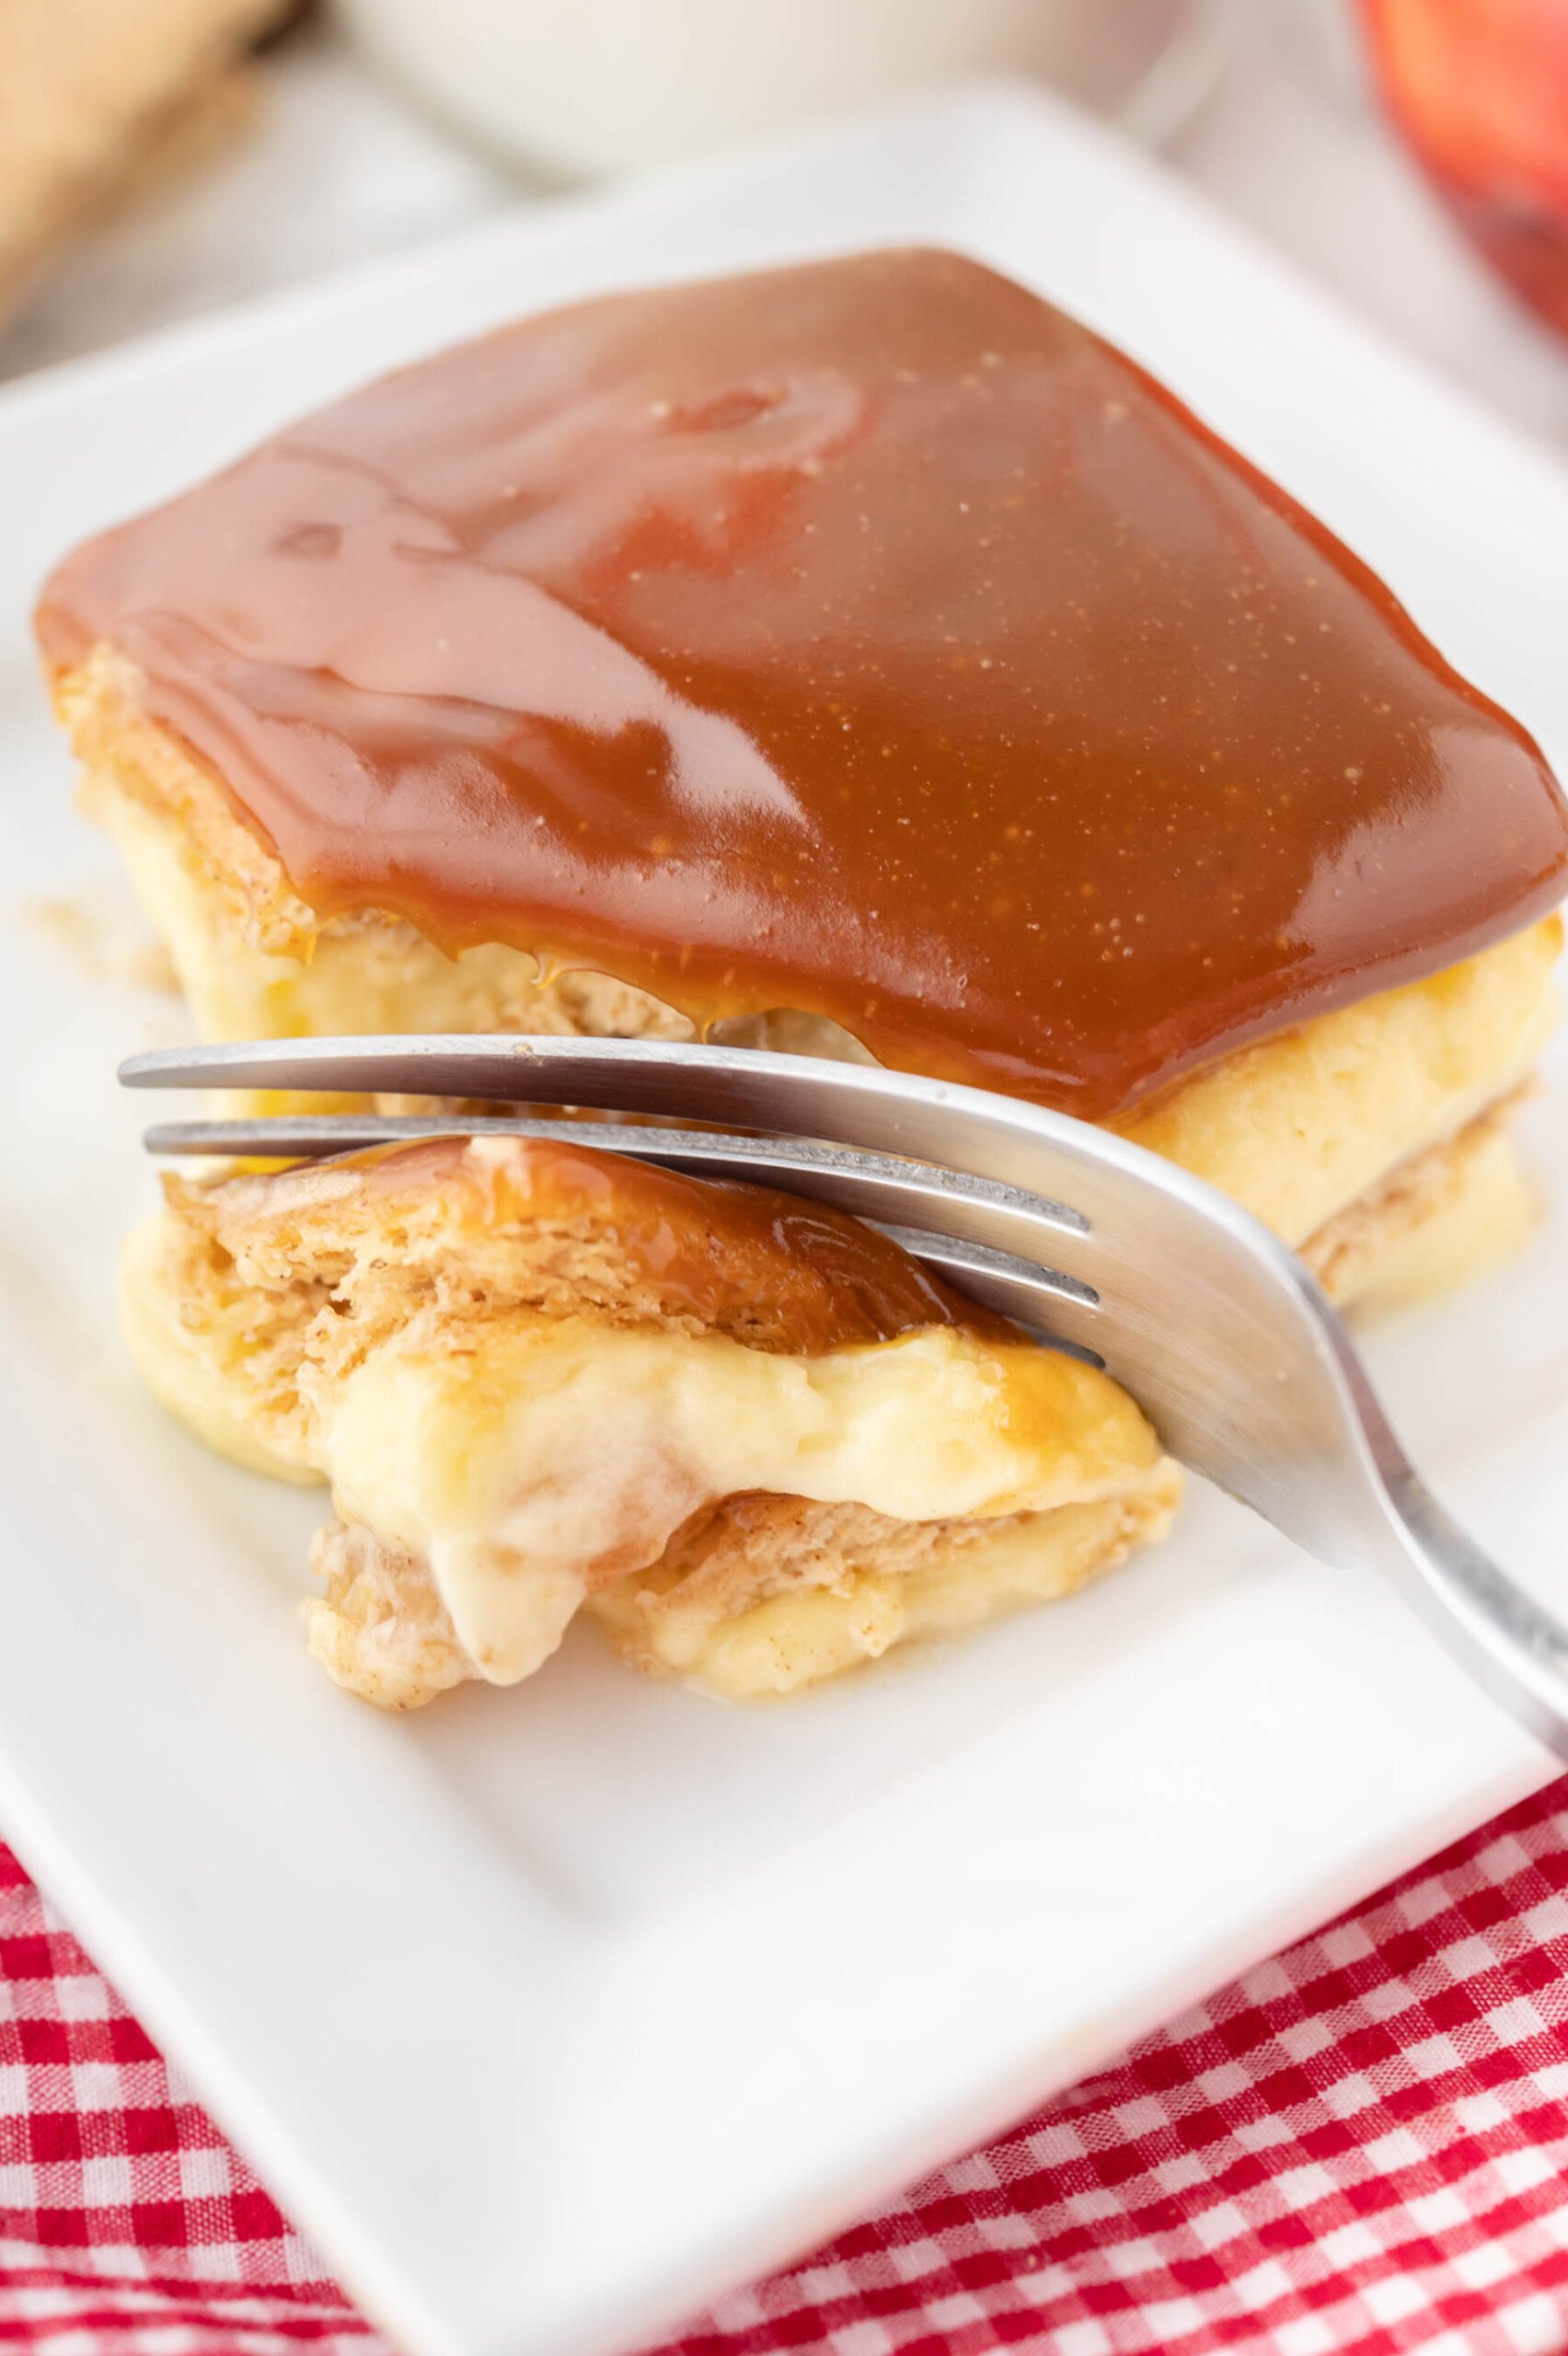 A fork cutting a bite from a slice of caramel apple eclair cake on a white plate.